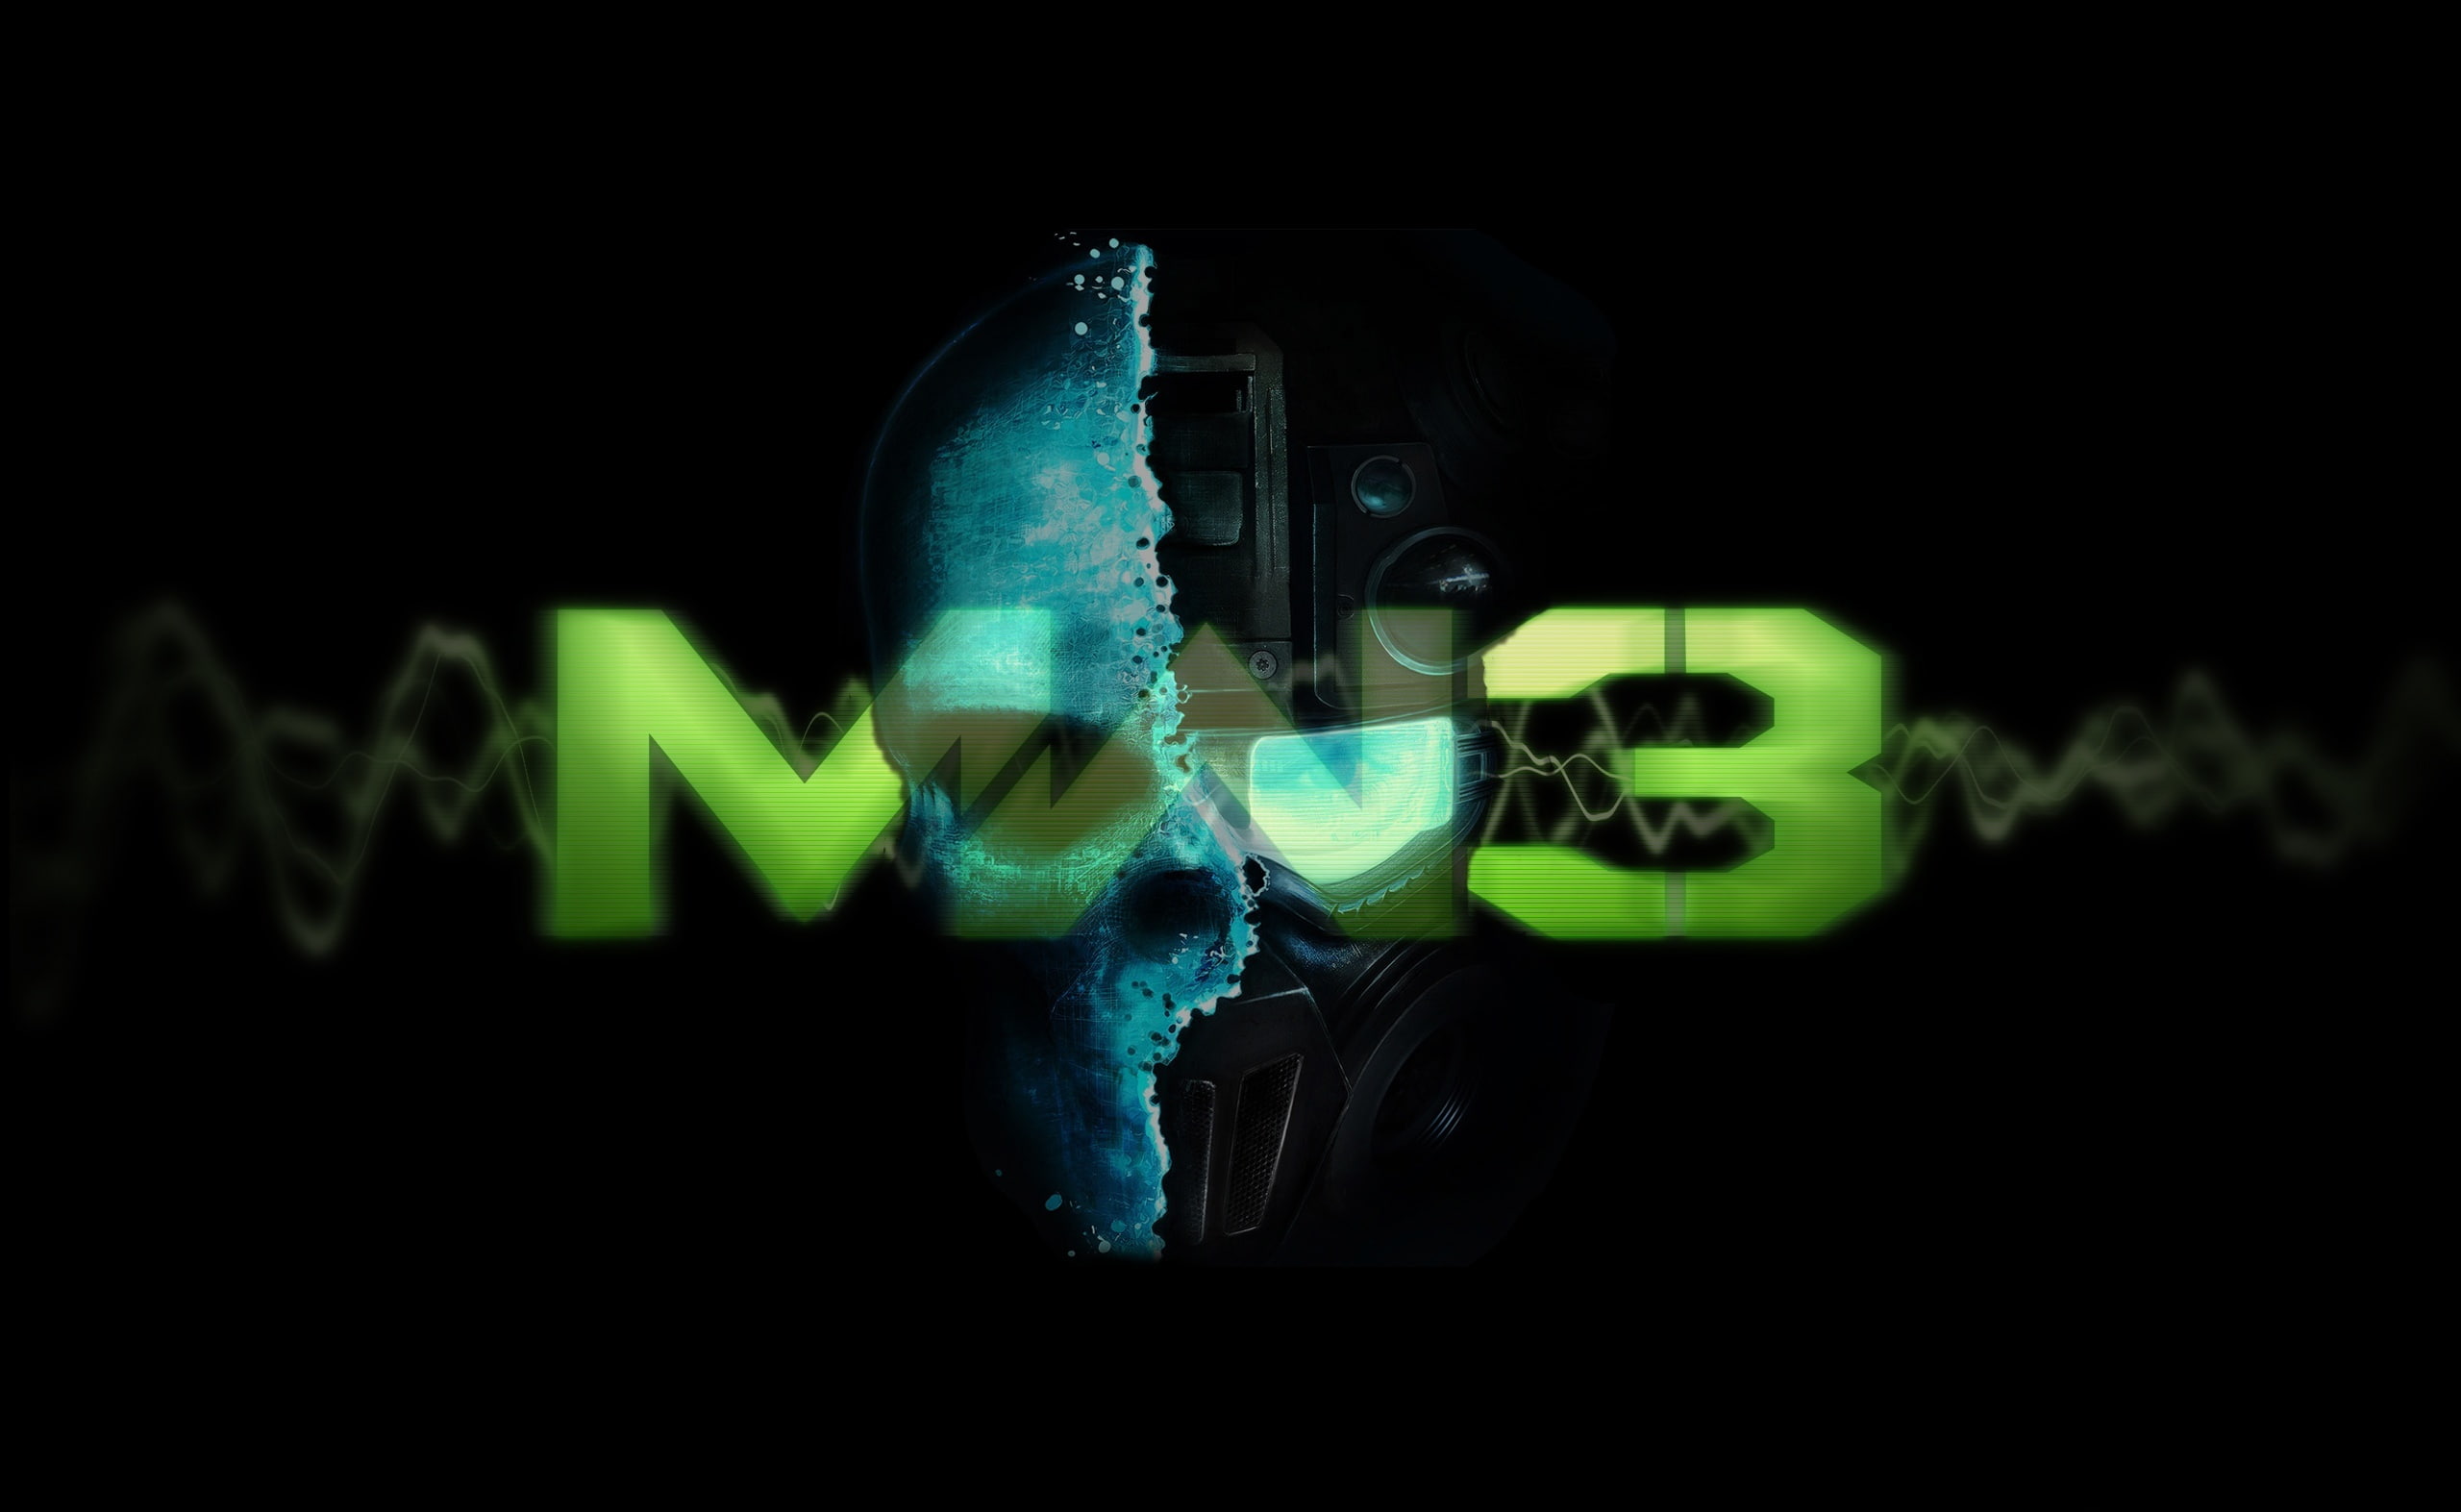 MW3, green MW3 text on black background, Games, Call Of Duty